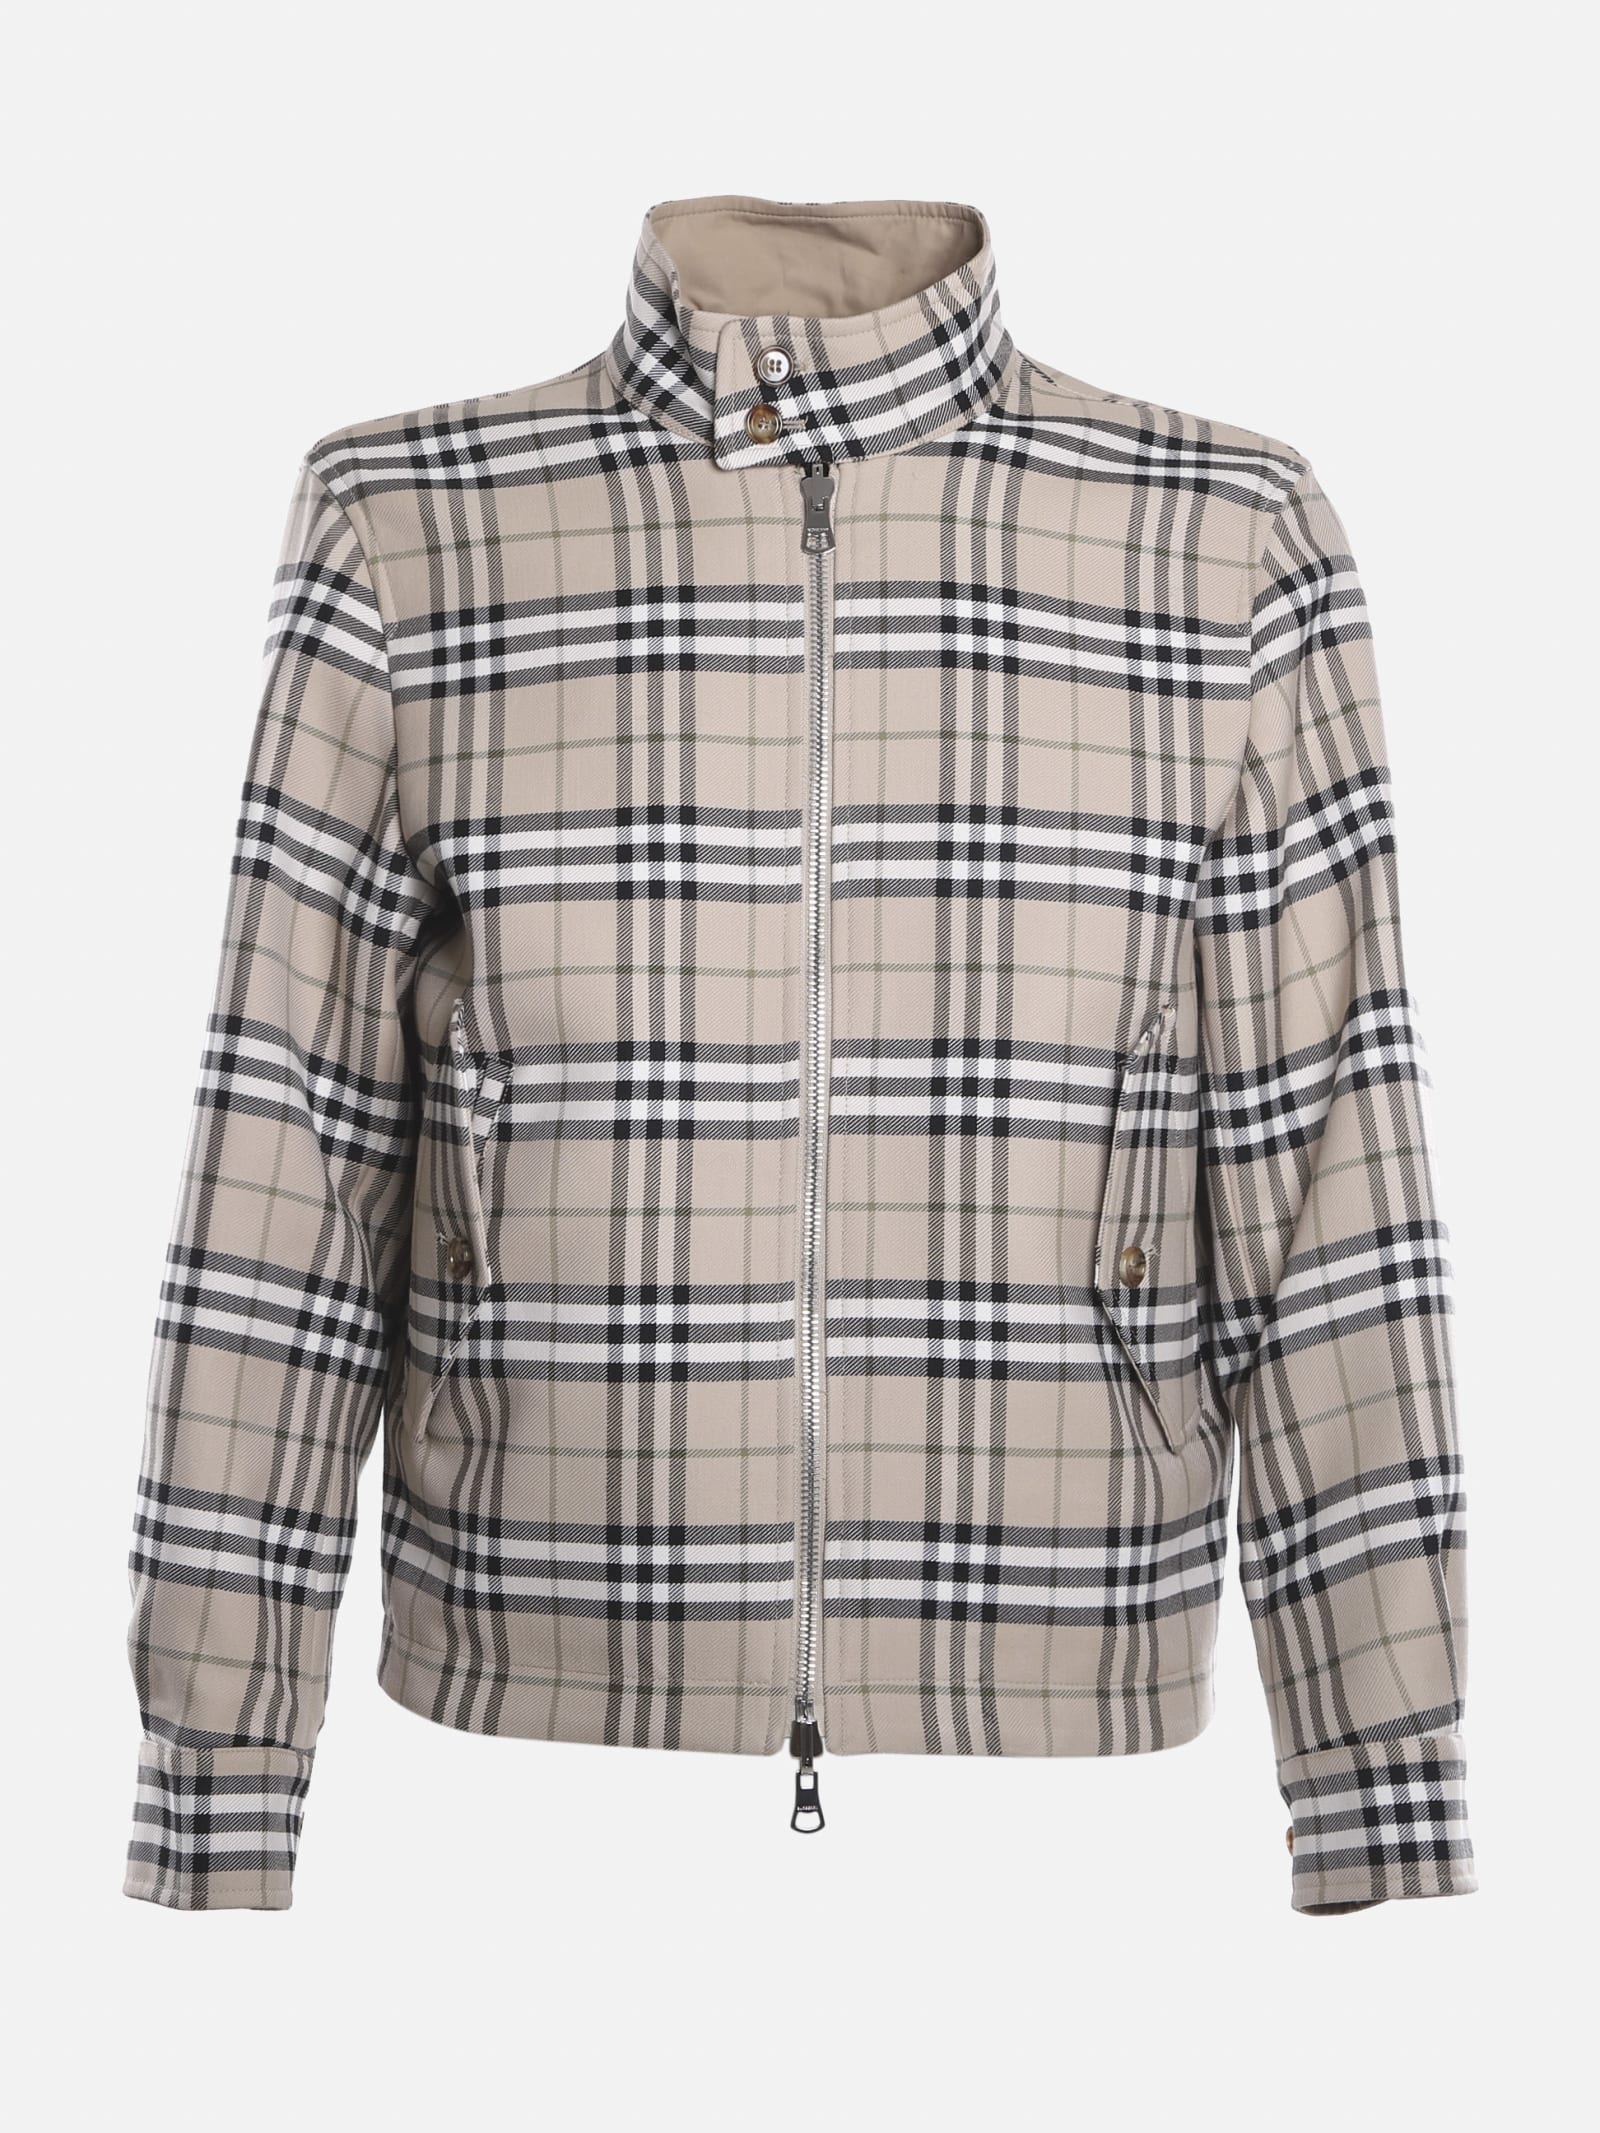 Burberry Reversible Jacket With All-over Vintage Check Pattern